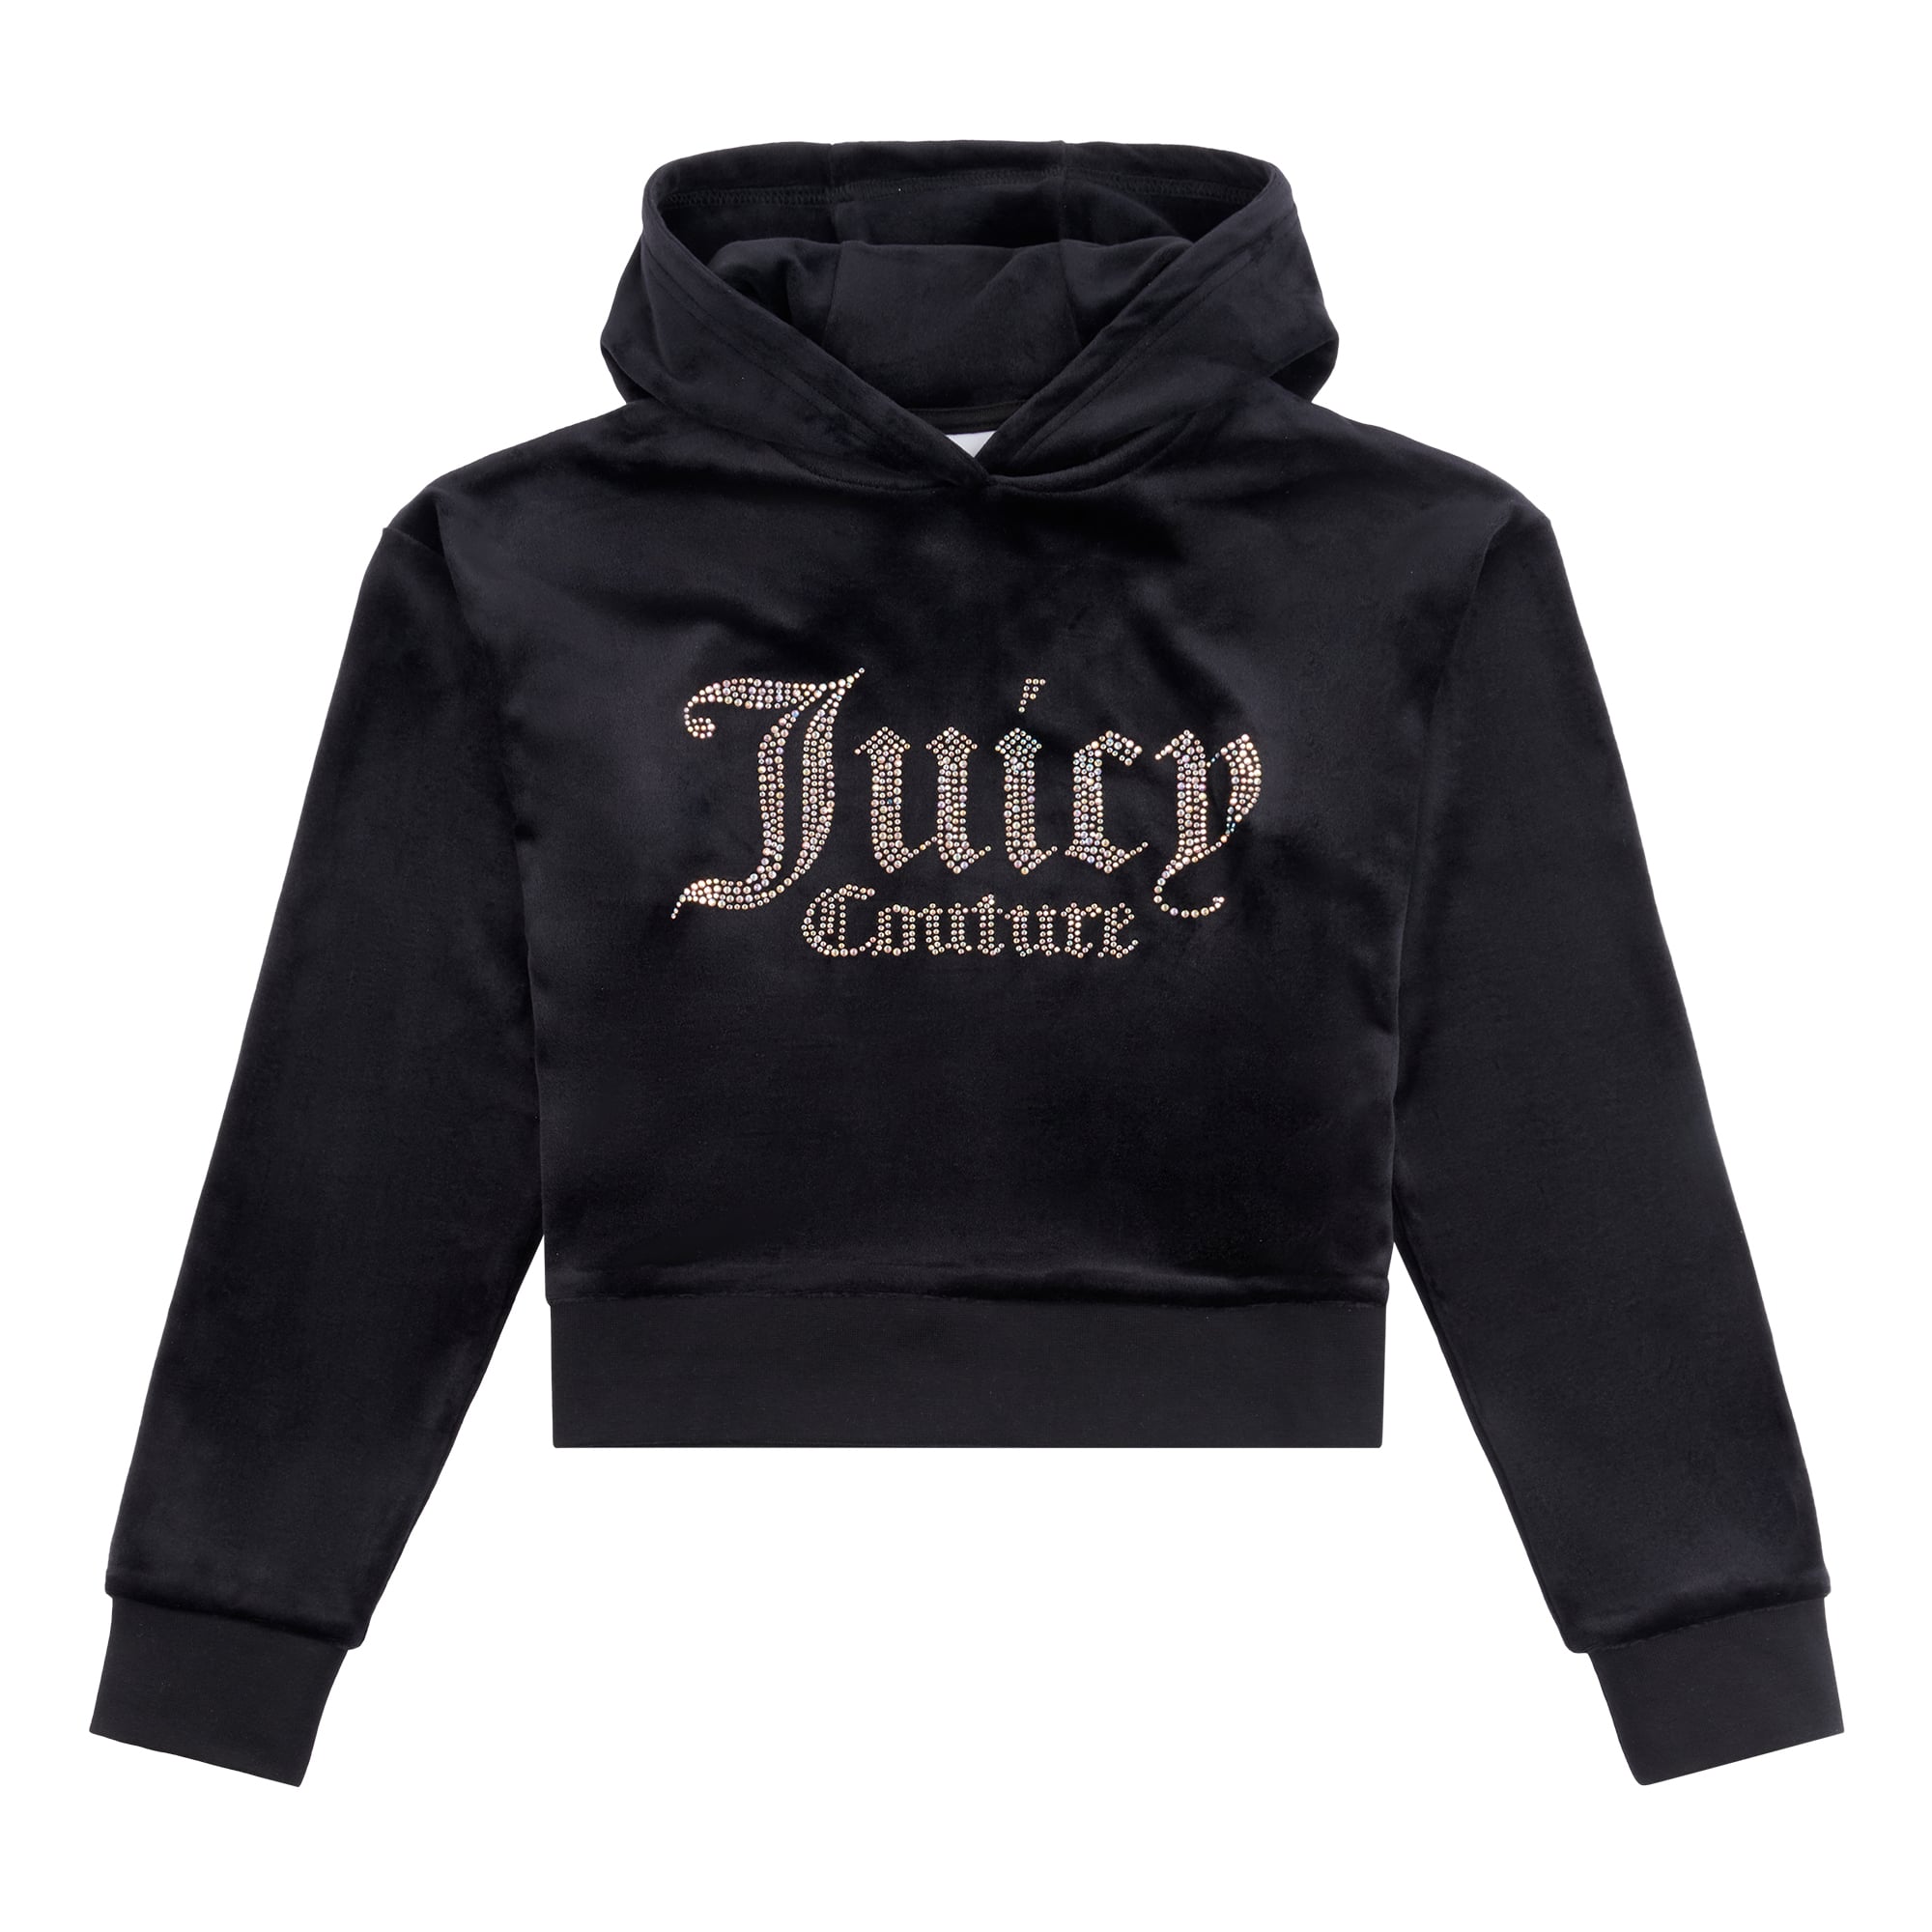 Juicy Couture girls black velour hoodie front view